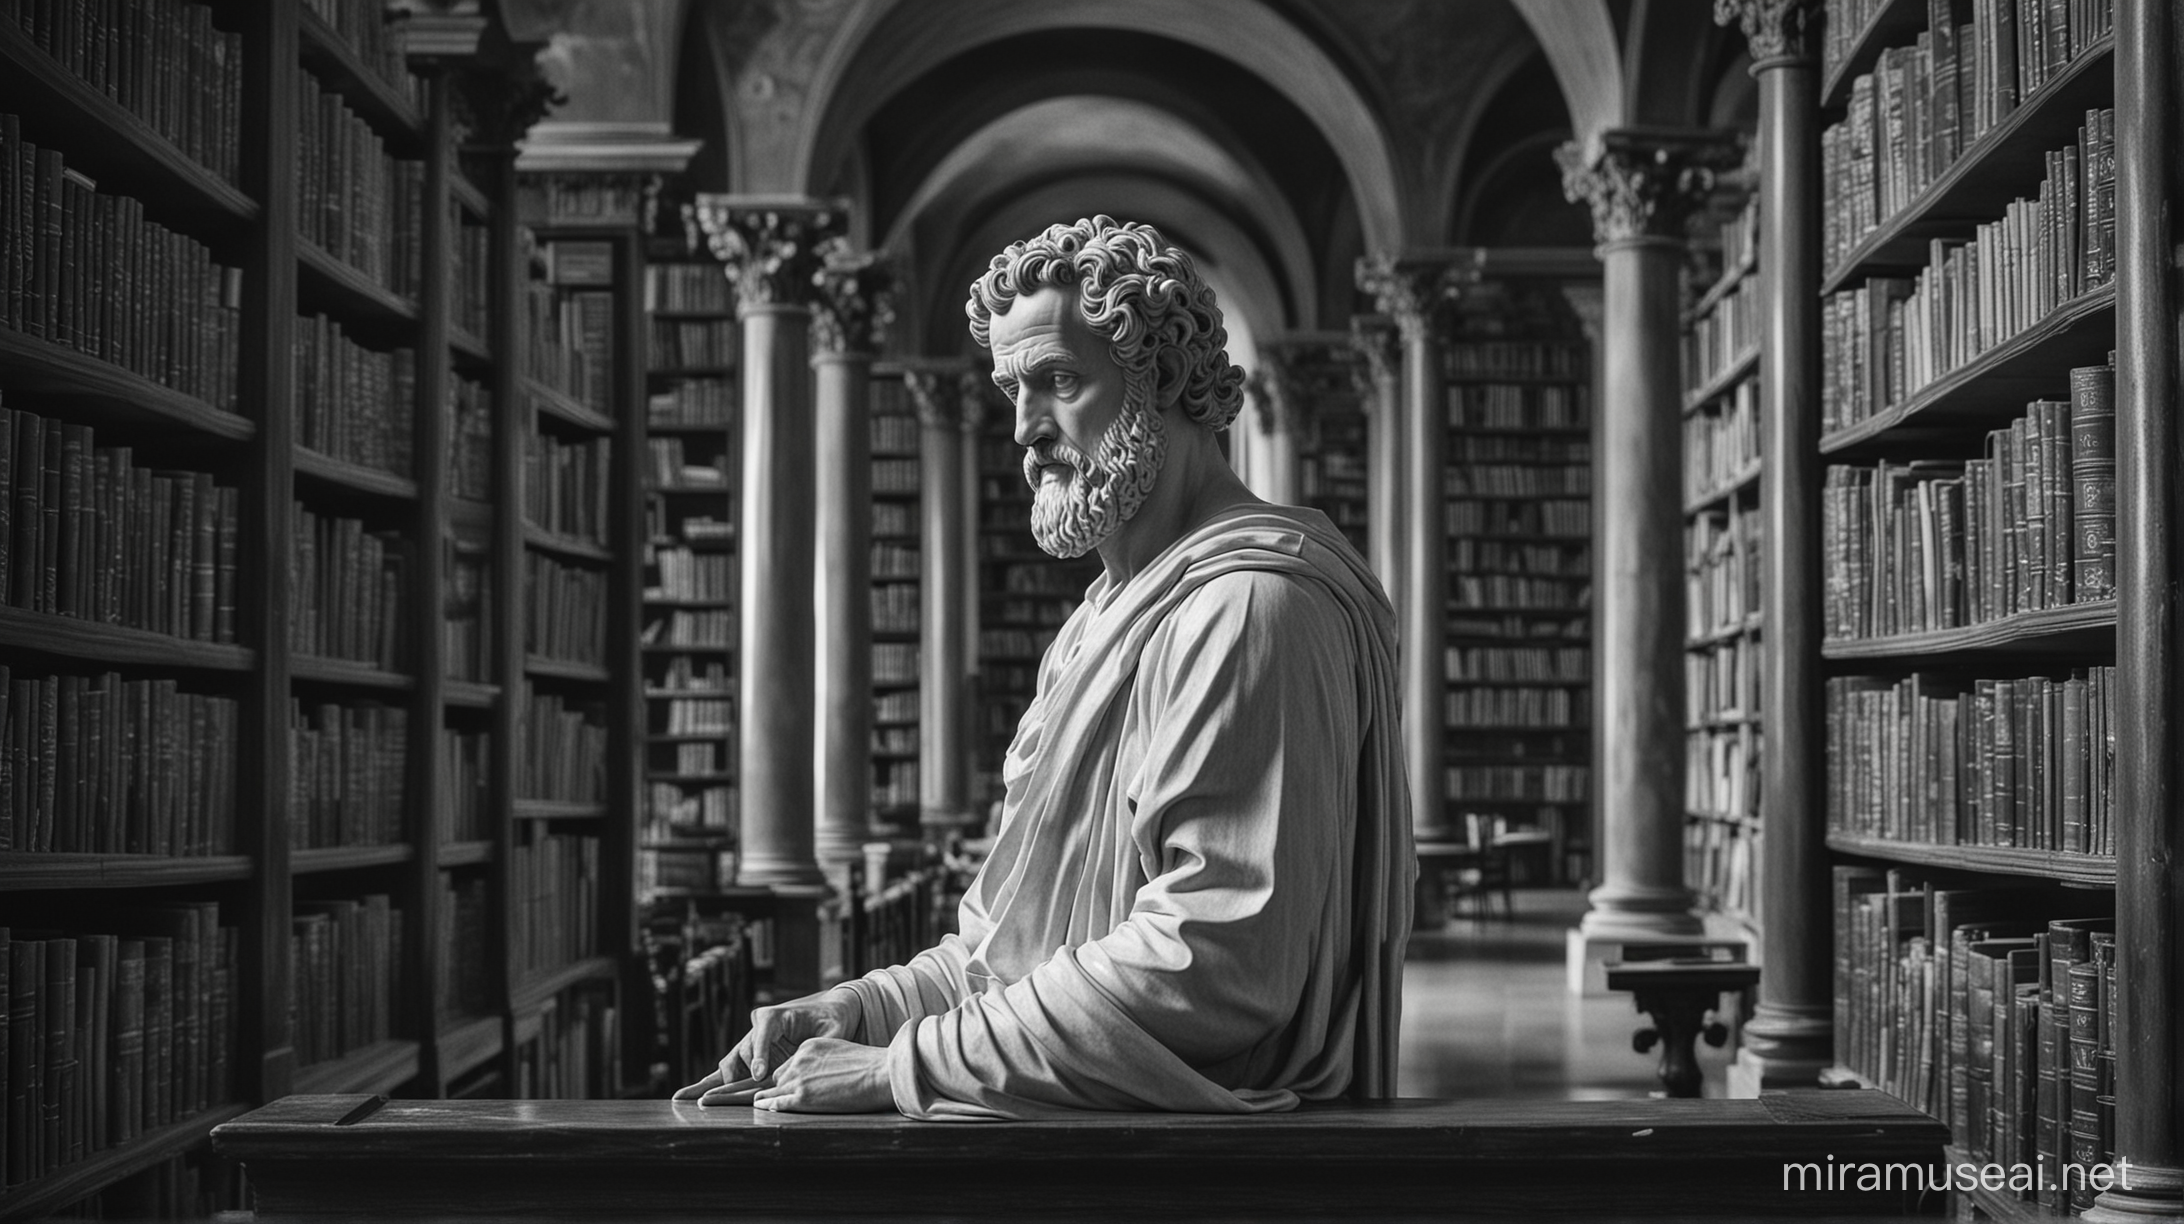 Create a black and white image of an ancient Stoic philosopher in a professional setting. The character should be depicted [The Stoic philosopher standing in a grand library, surrounded by shelves of scrolls and books, deep in thought] reflecting the principles of Stoicism